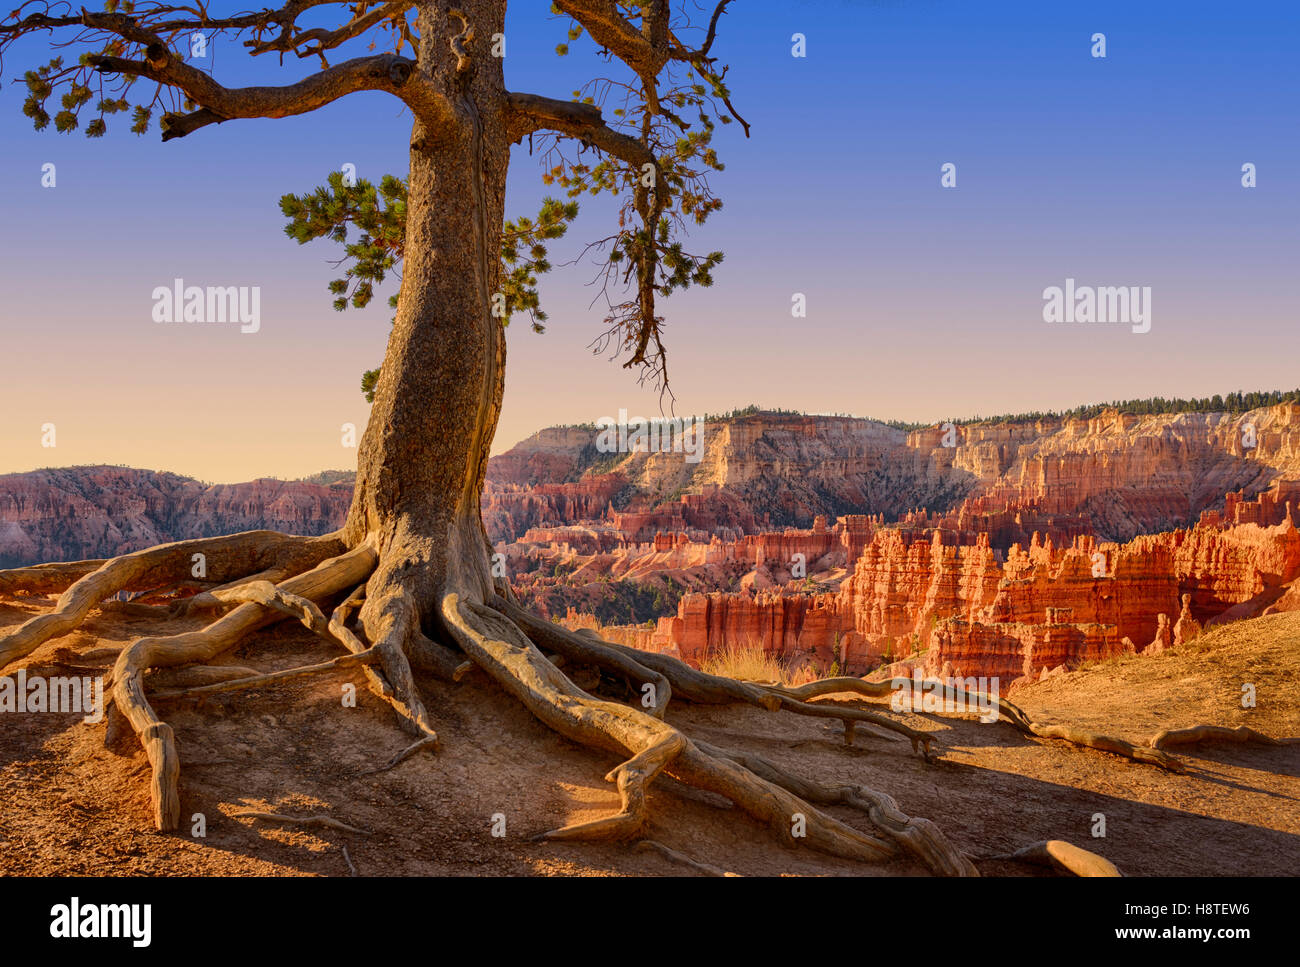 Pine tree gets a grip on the canyon edge. Bryce Canyon National Park, Utah, USA Stock Photo